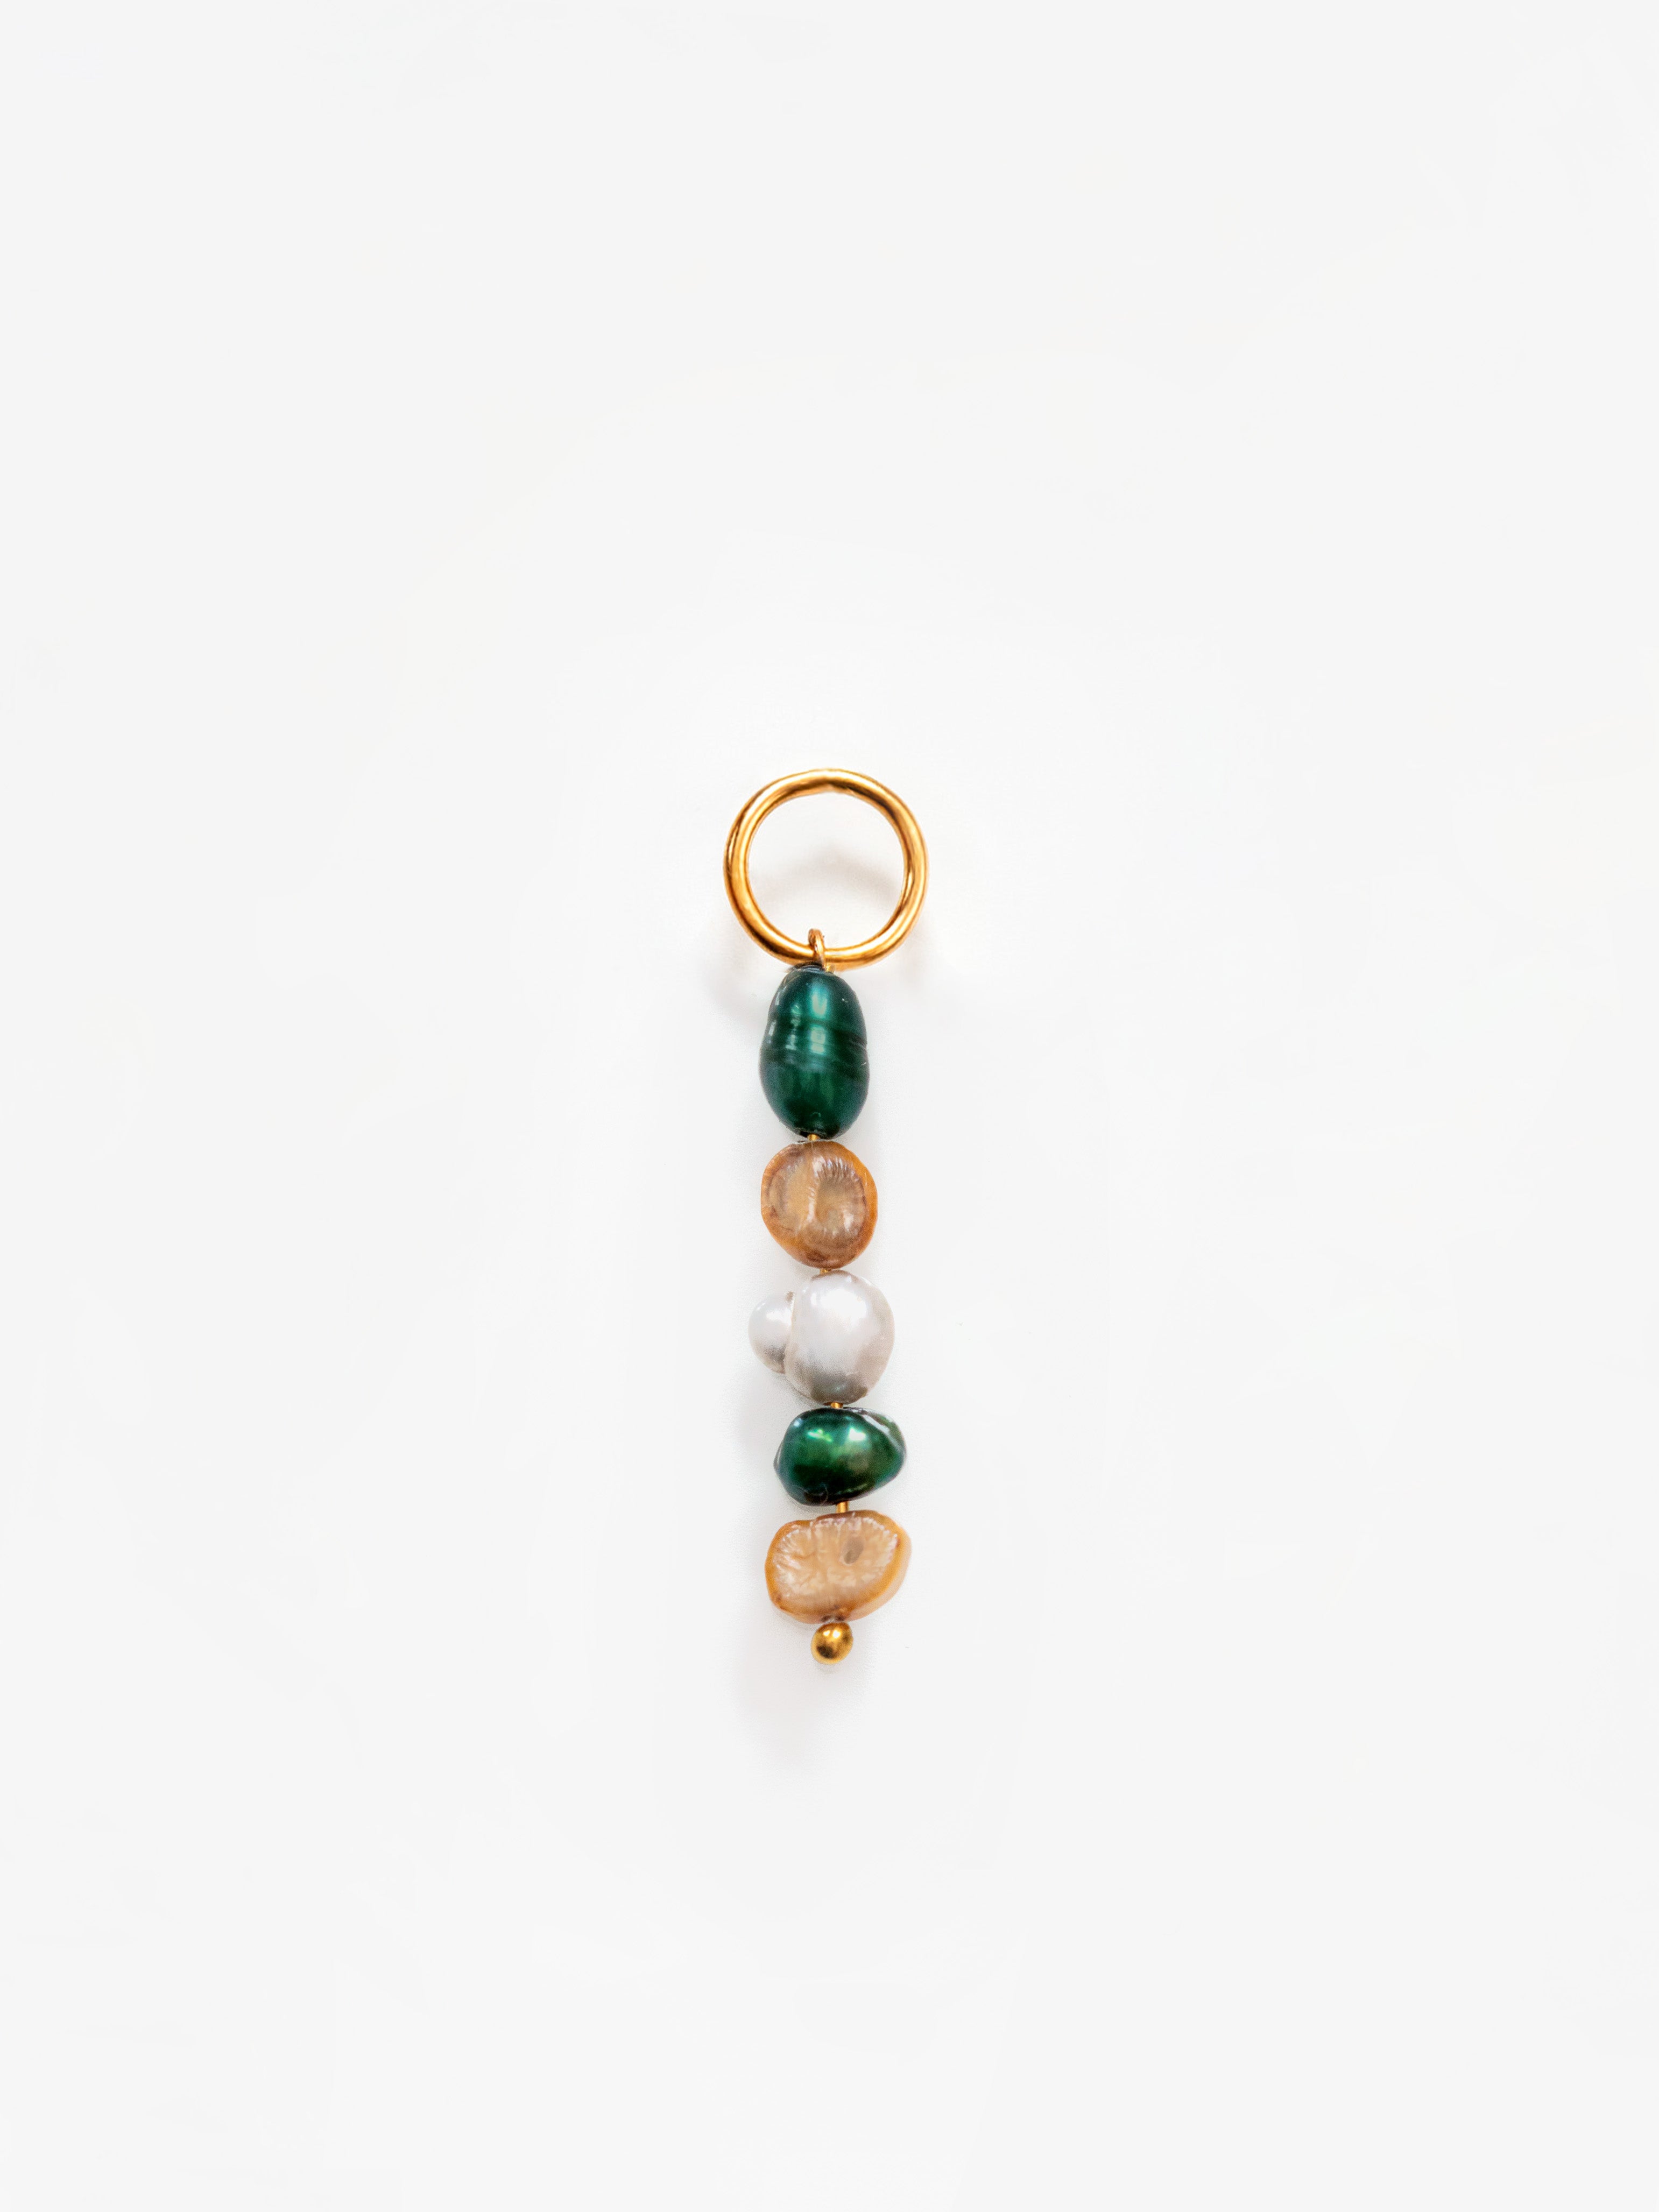 Gold Long Green And Brown Pearl Pendant / Charm